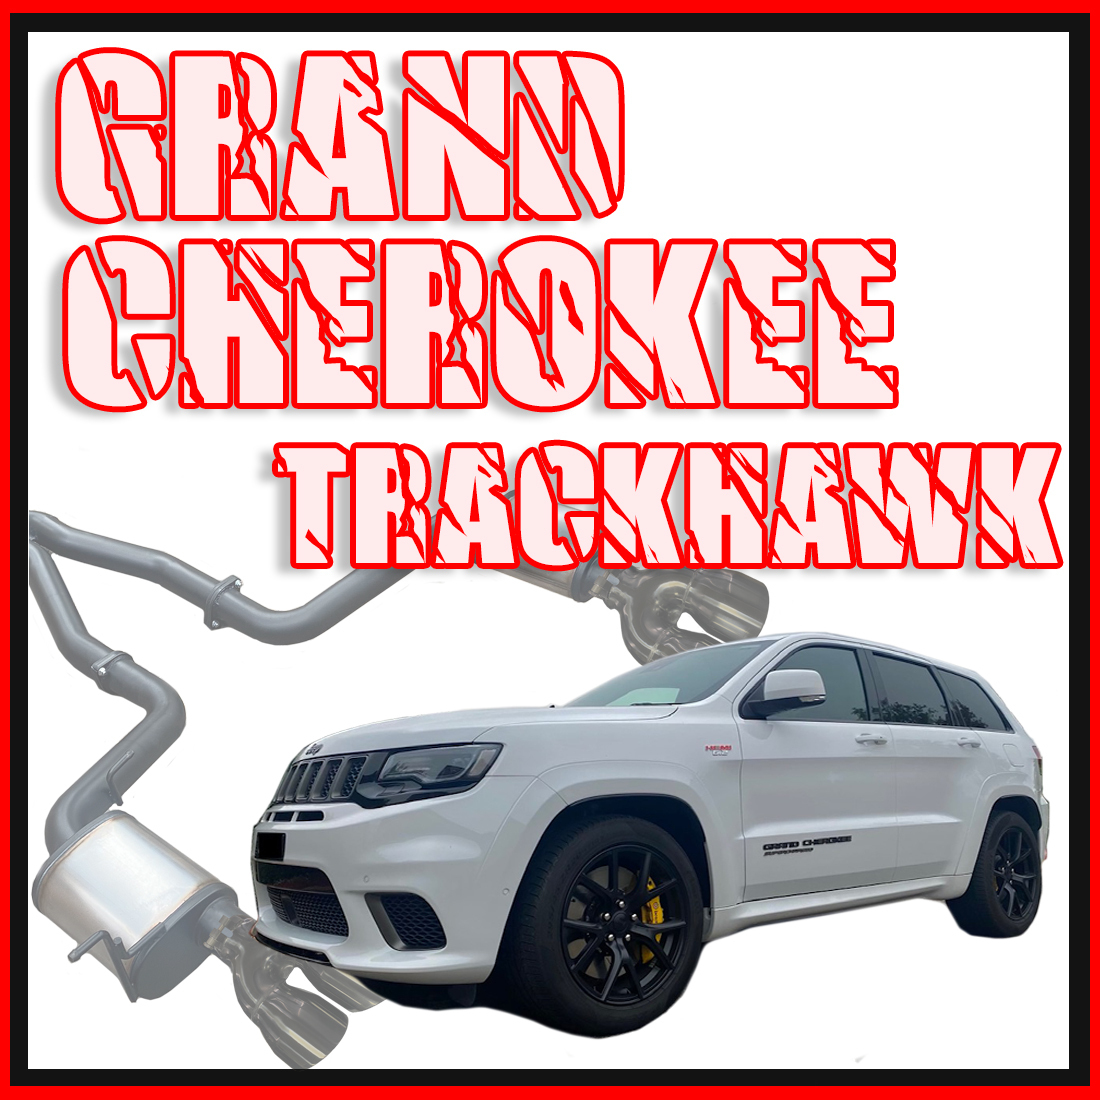 Jeep Grand Cherokee Exhaust Trackhawk 6.2L Supercharged 3" Cat Back System image